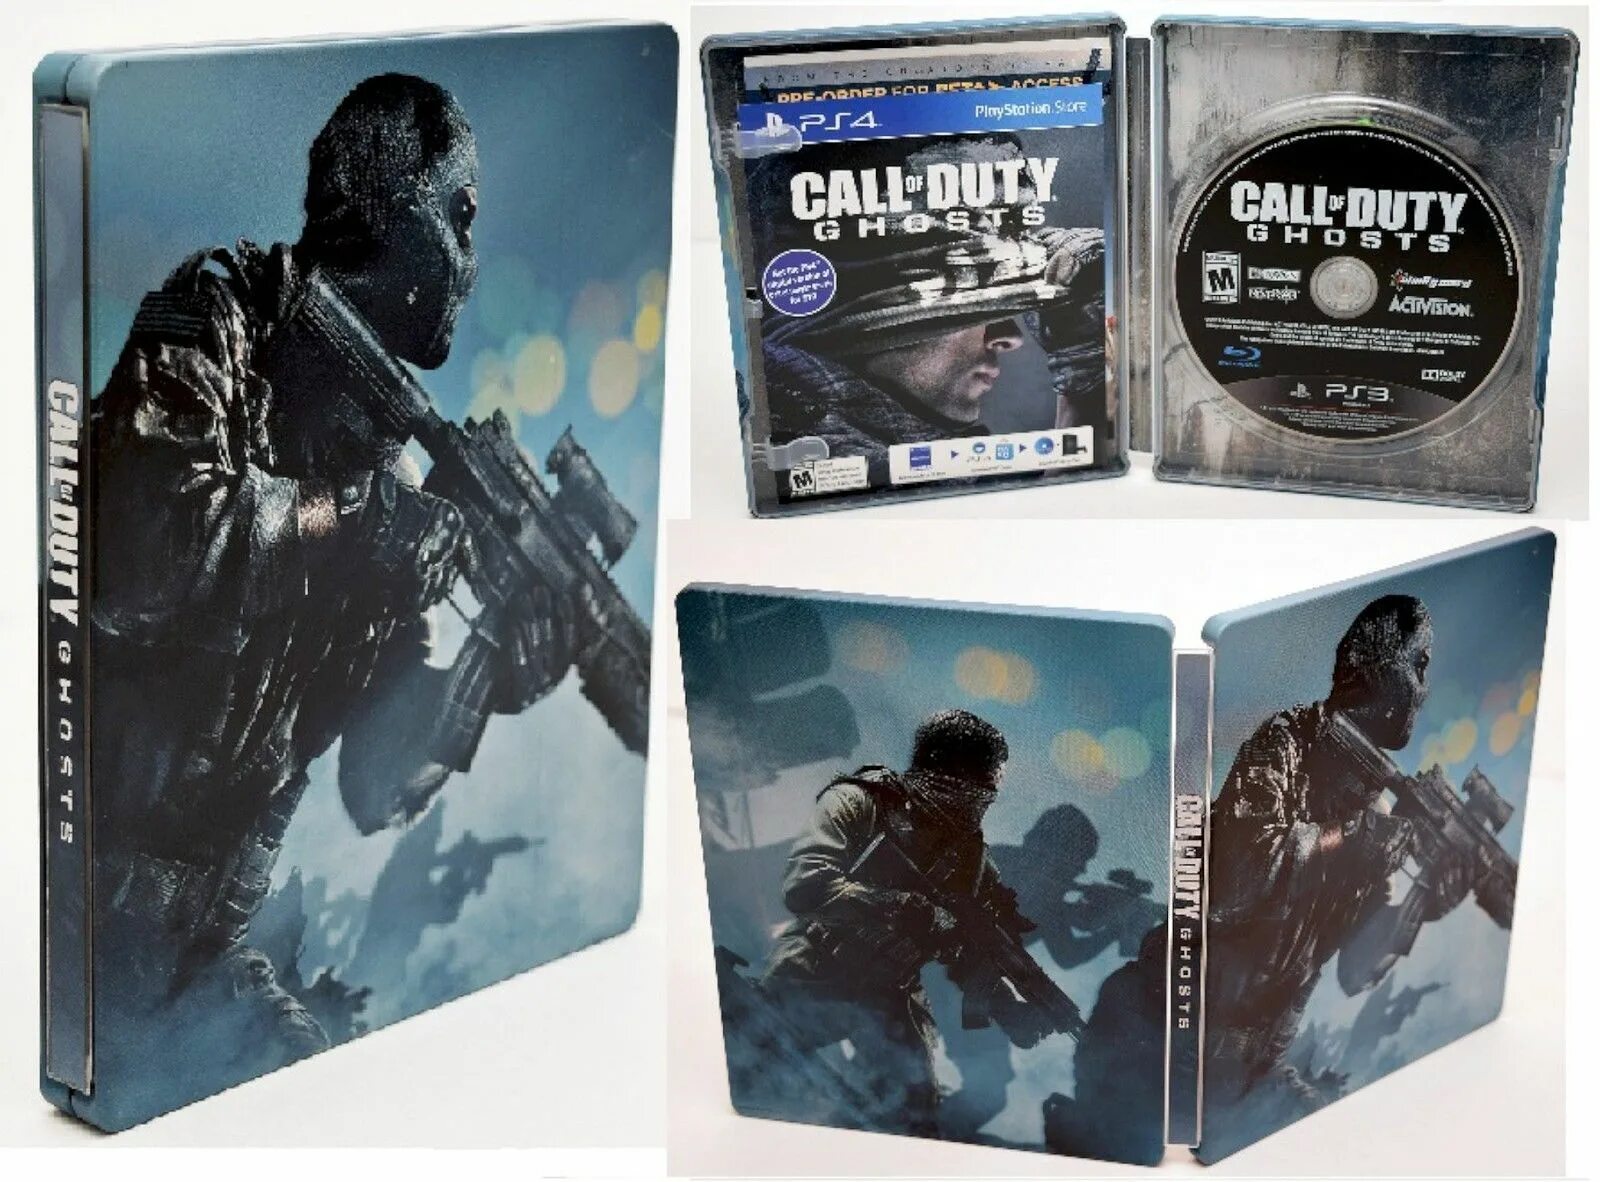 Call of duty ps5 купить. Call of Duty Ghosts диск на пс3. Call of Duty: Modern ps4 диск. Call of Duty Modern Warfare 2 ps4 диск. Call of Duty 2 диск.